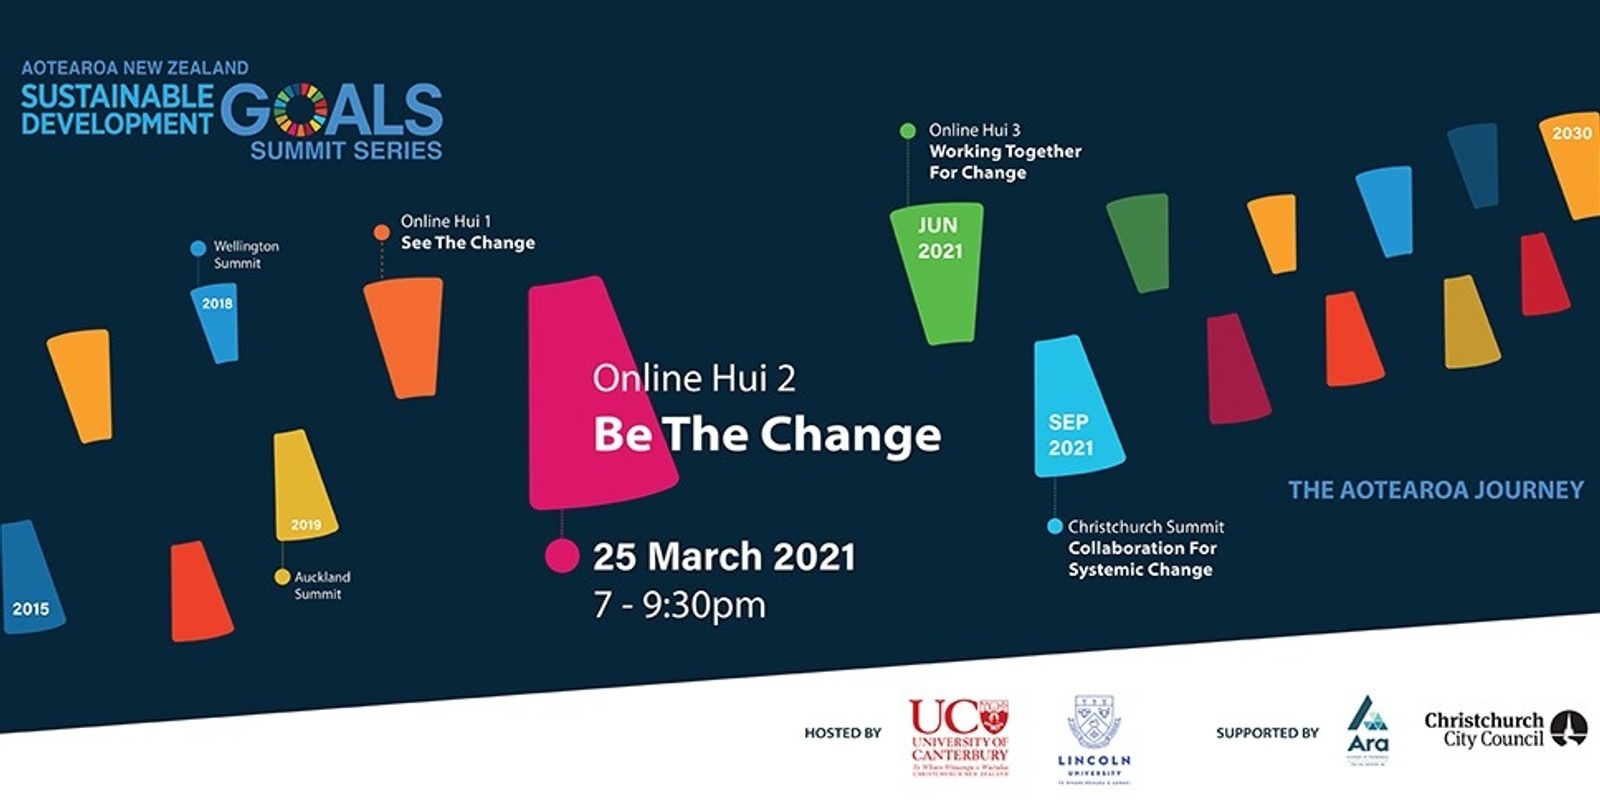 Banner image for Aotearoa SDG Summit Series - Be The Change (Online Hui 2)